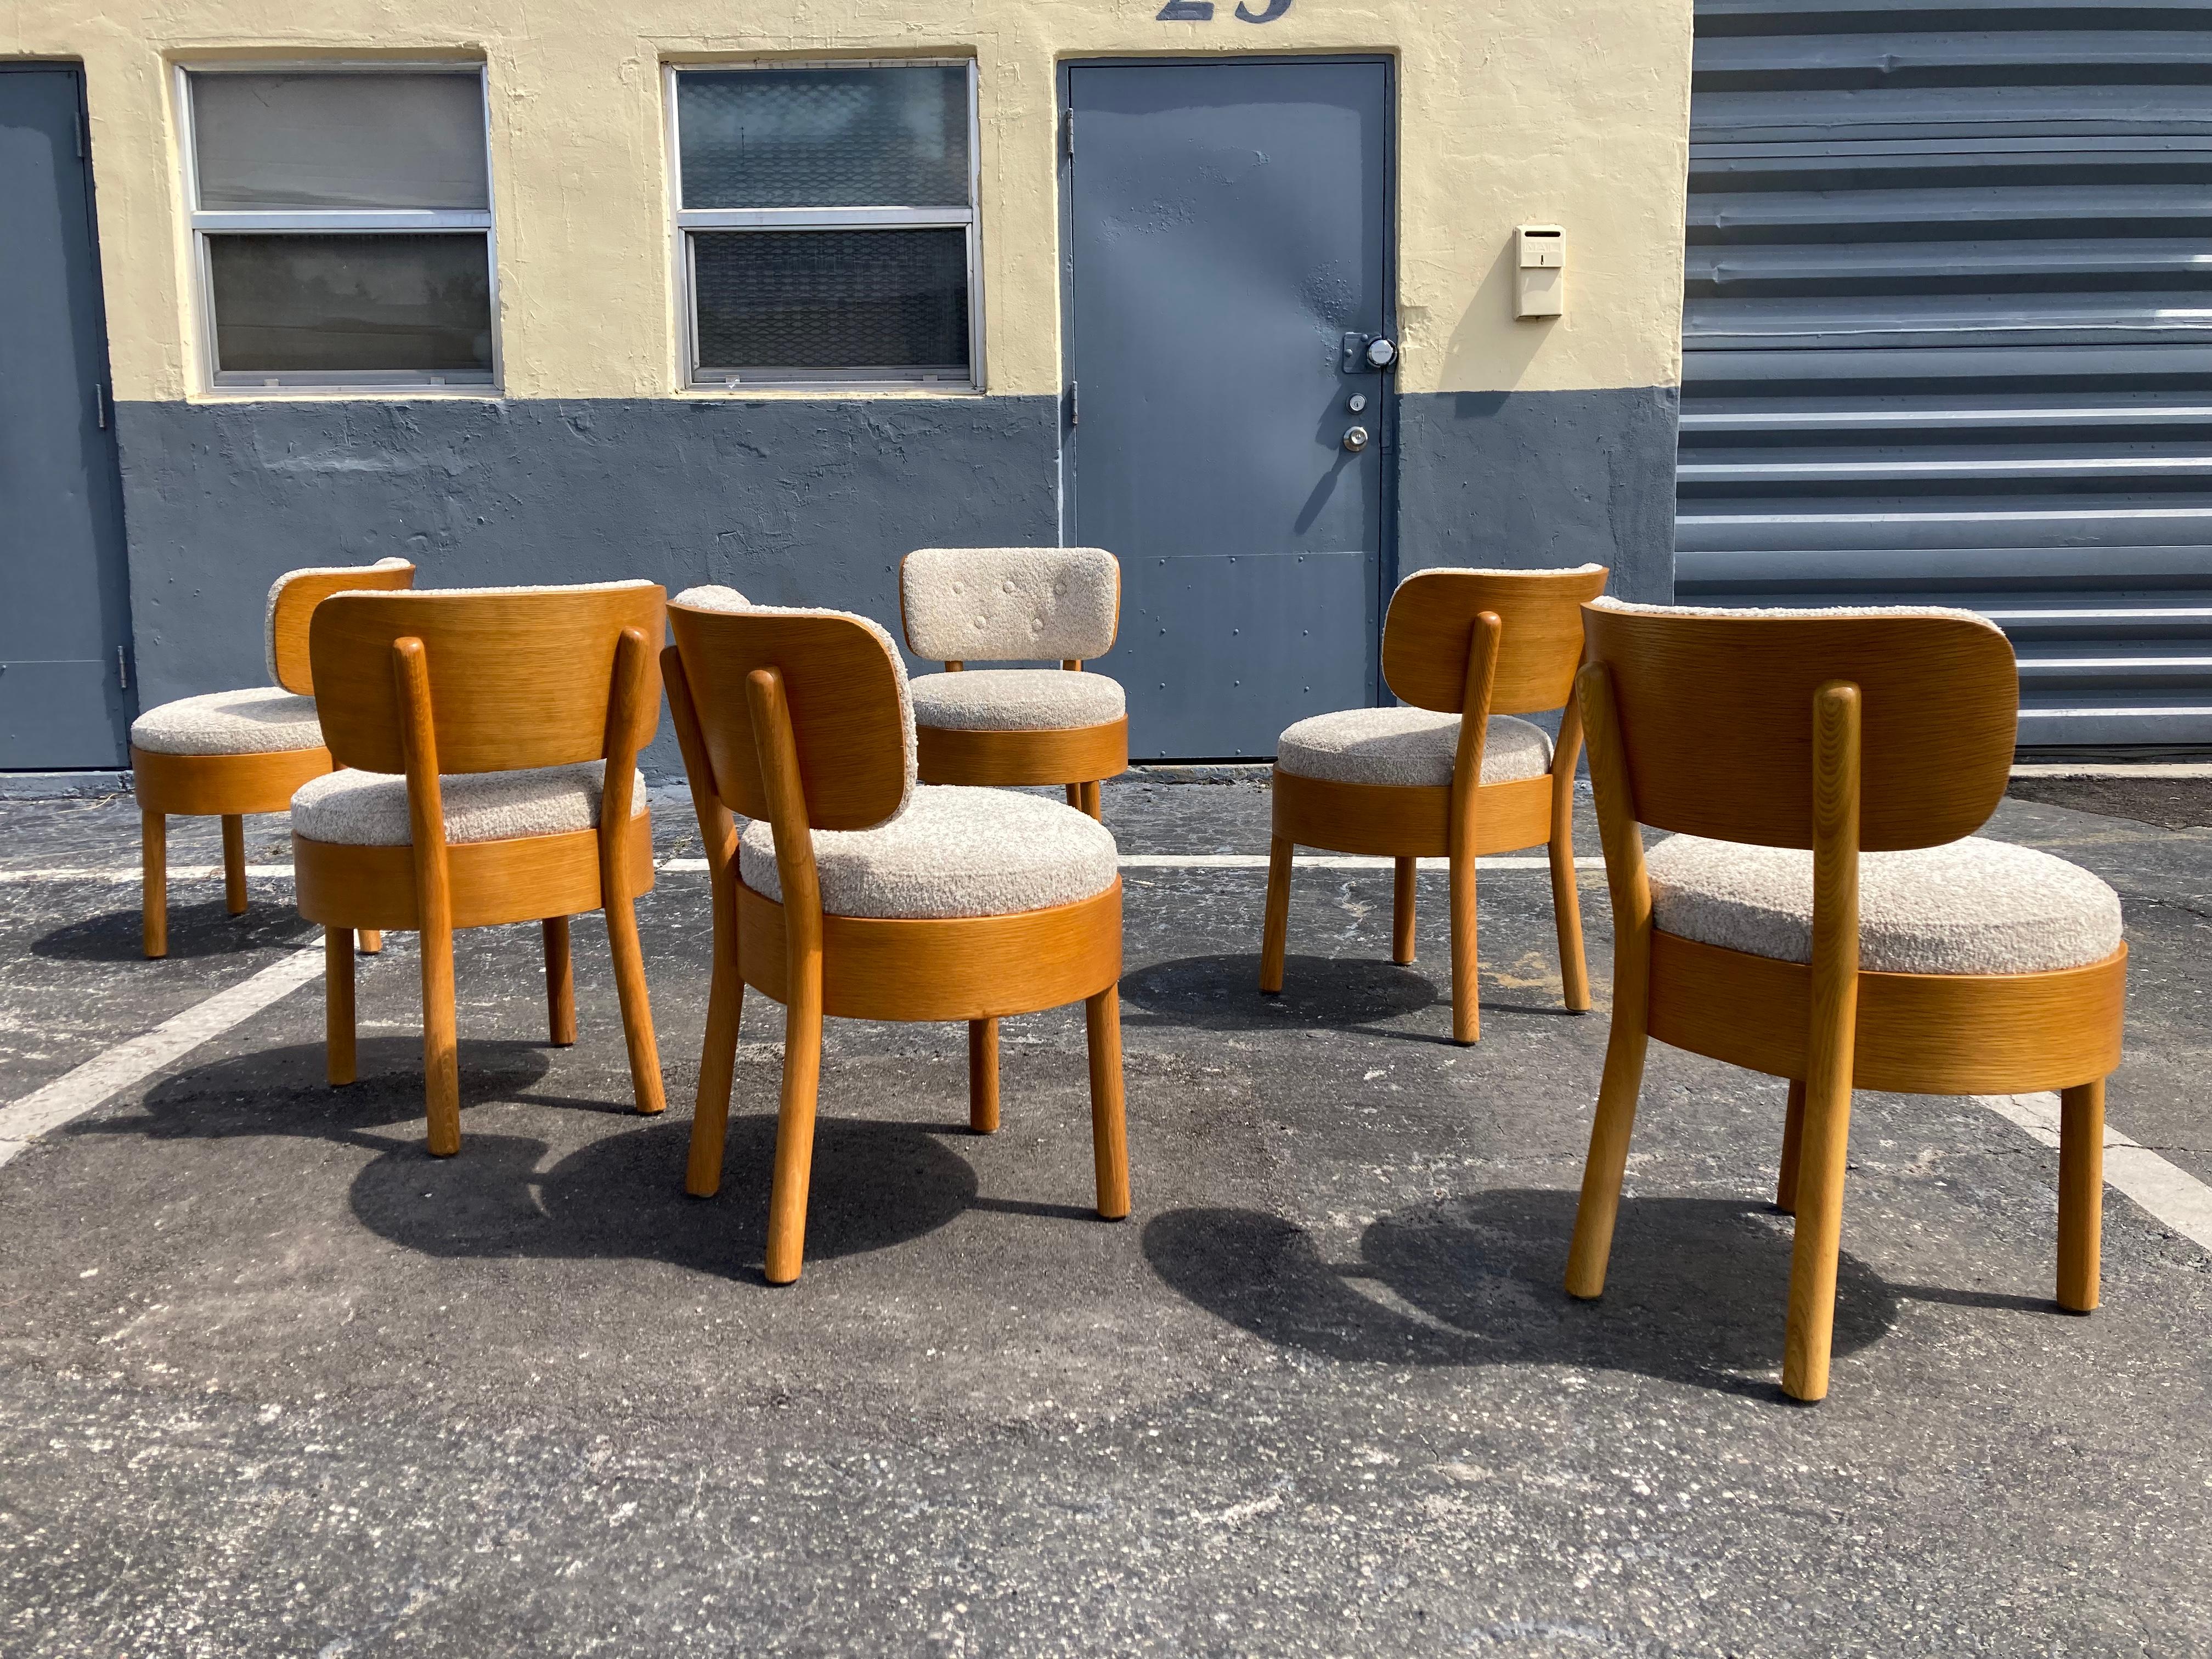 Great set of Six Dining Chairs in the style of Viggo Boesen, Bentwood oak seats and backs. The chairs have been reupholstered in sand colored boucle. In total twelve chairs available.